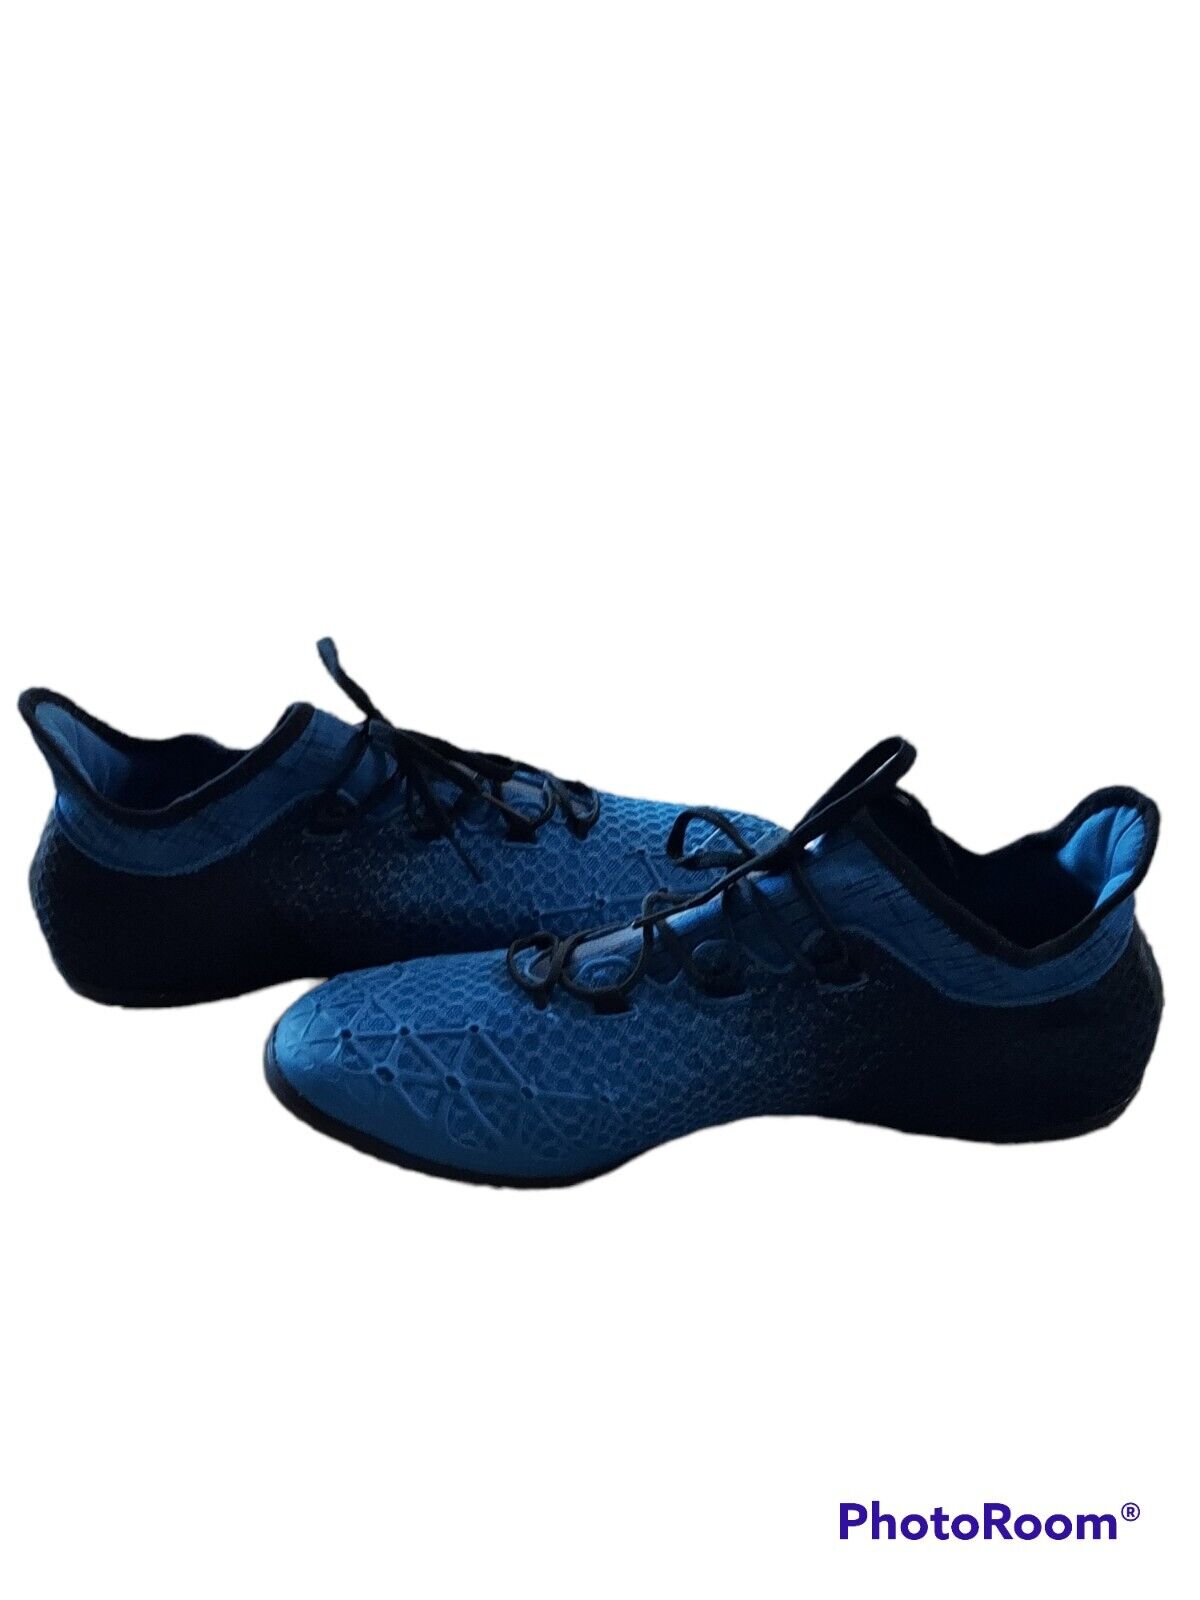 Emigrate gain Specified Adidas × Tango 16.1 IN Indoor Football Shoes | eBay